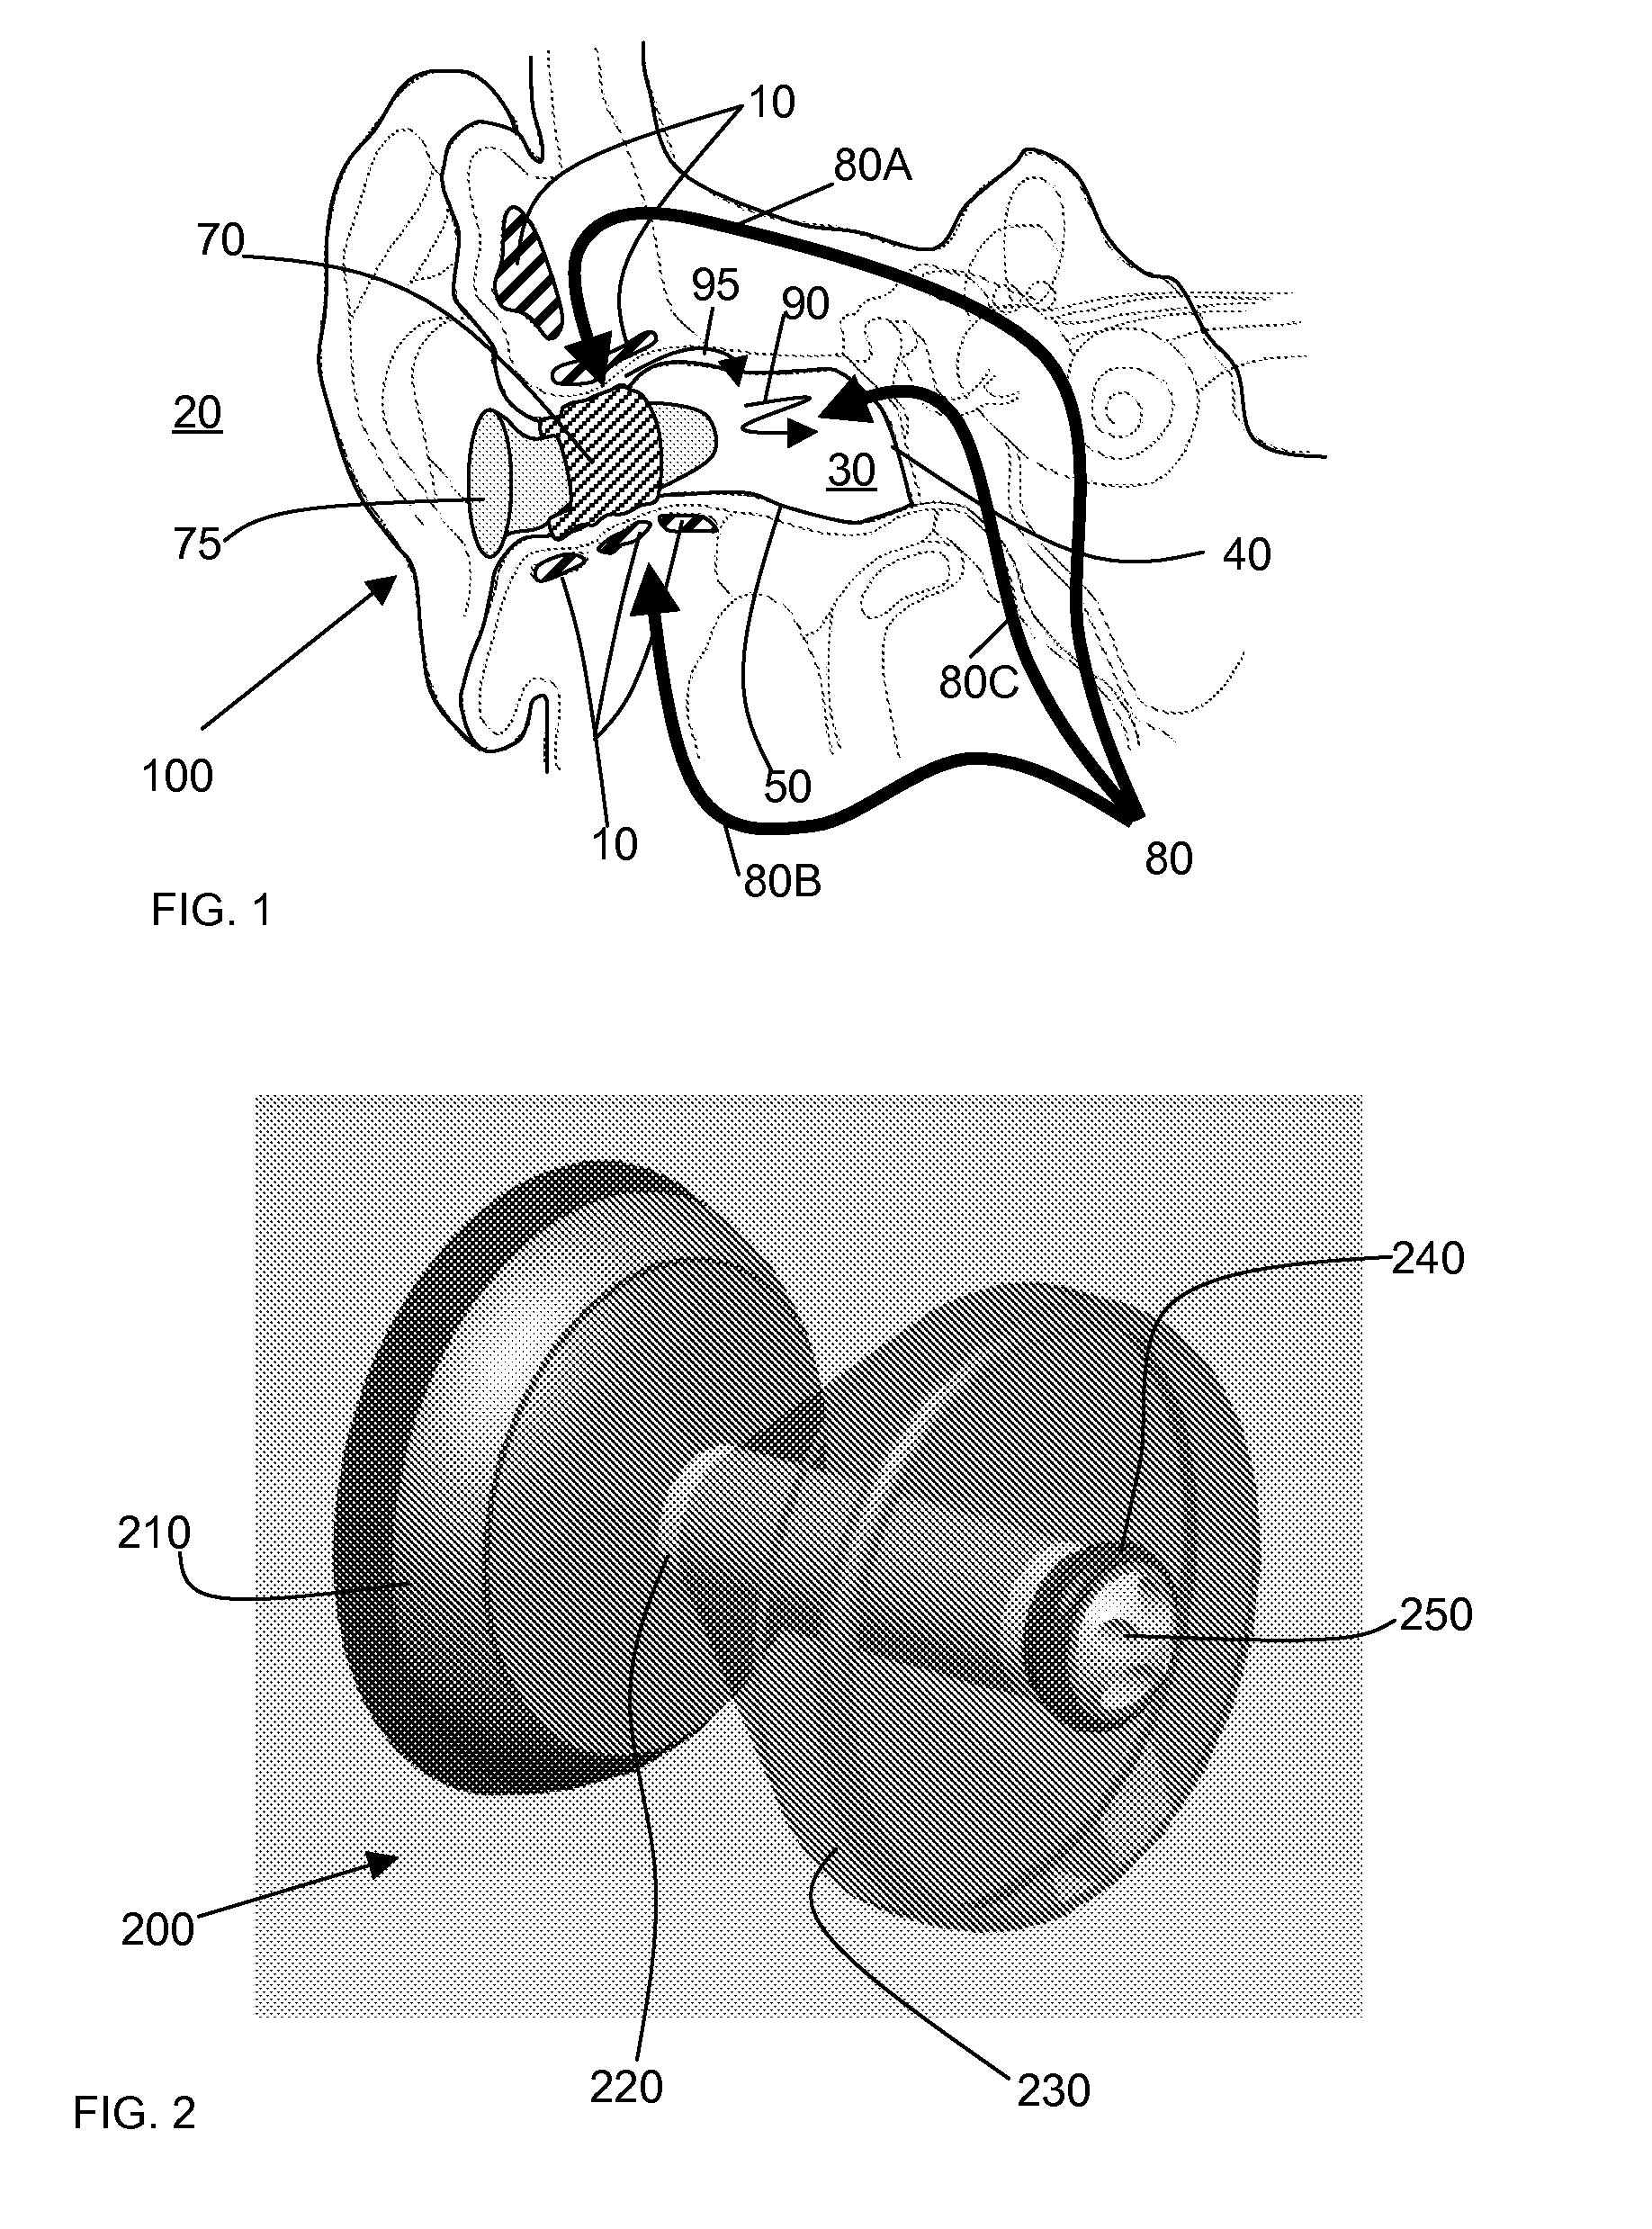 Expandable earpiece sealing devices and methods